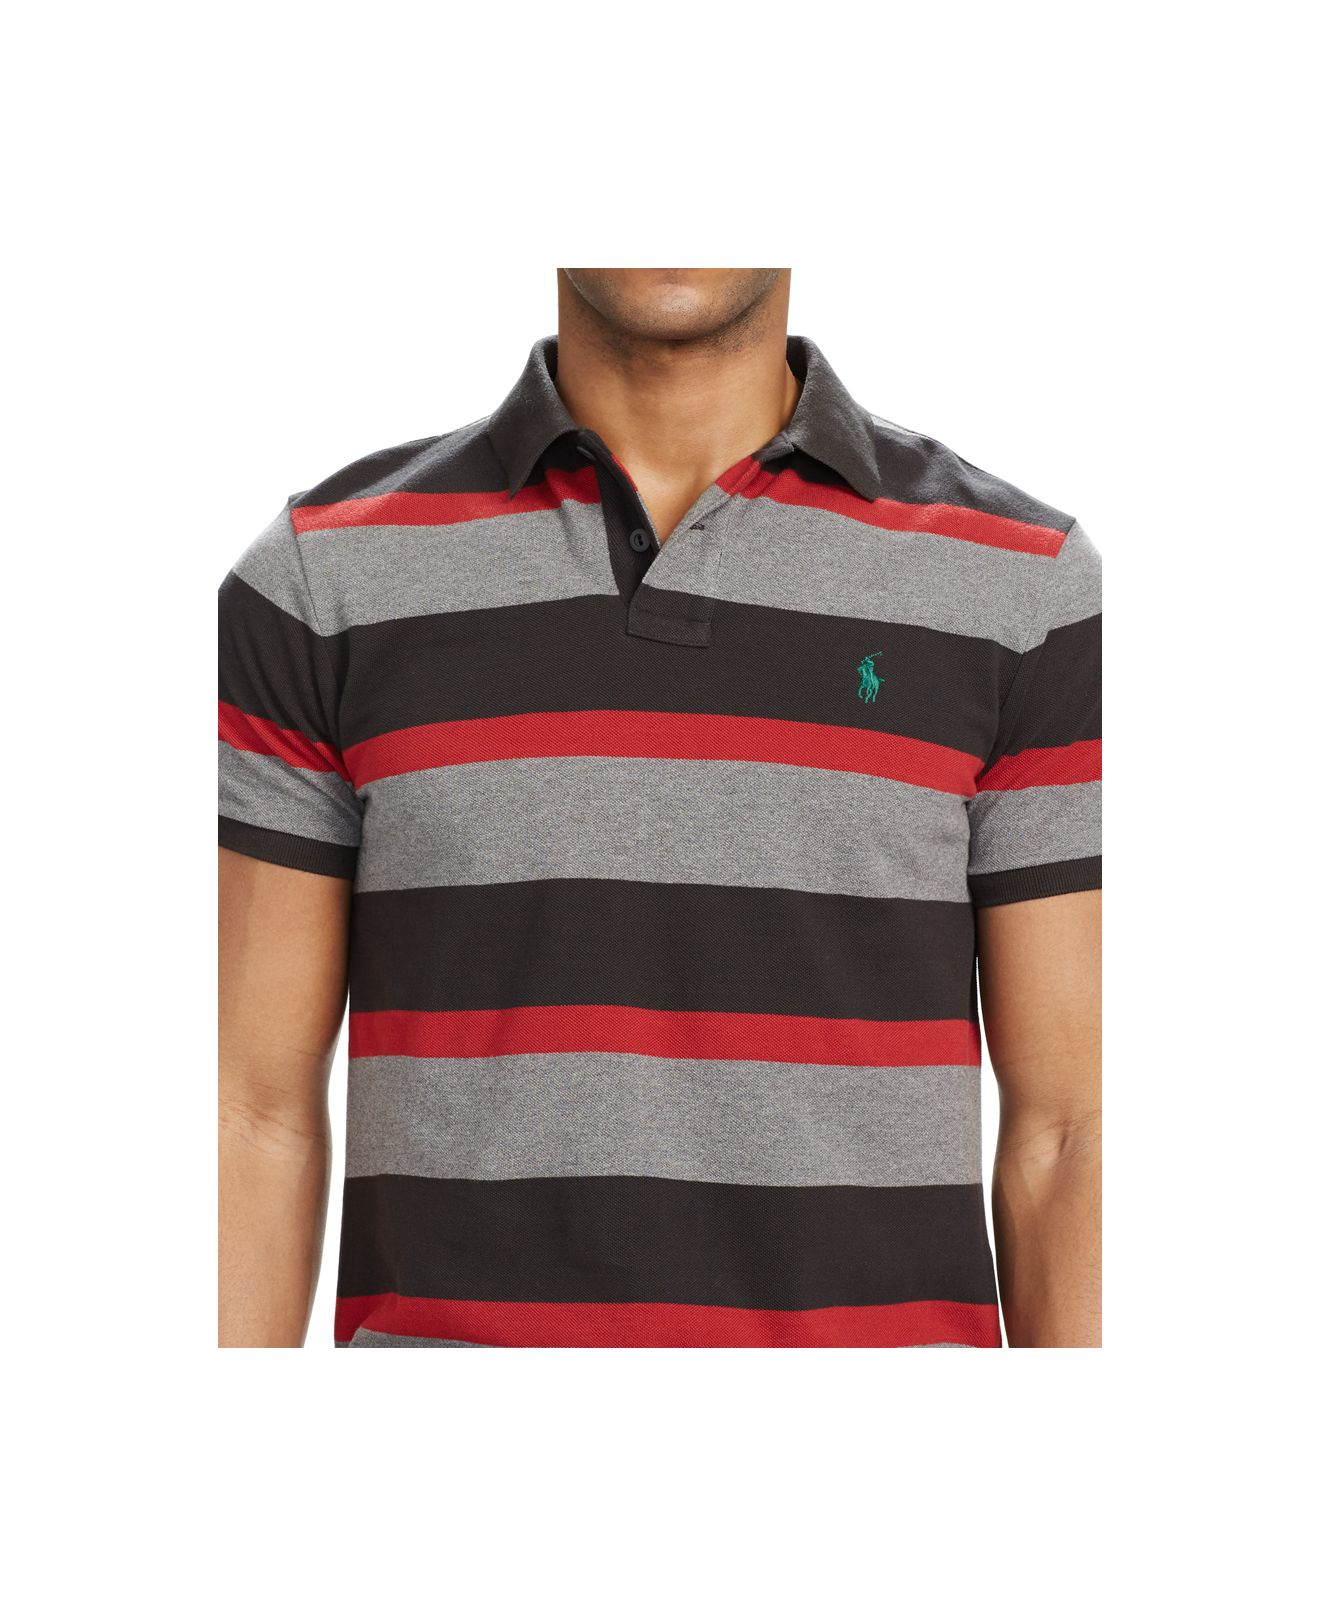 Polo ralph lauren Classic-fit Multi-striped Mesh Polo Shirt in Gray for